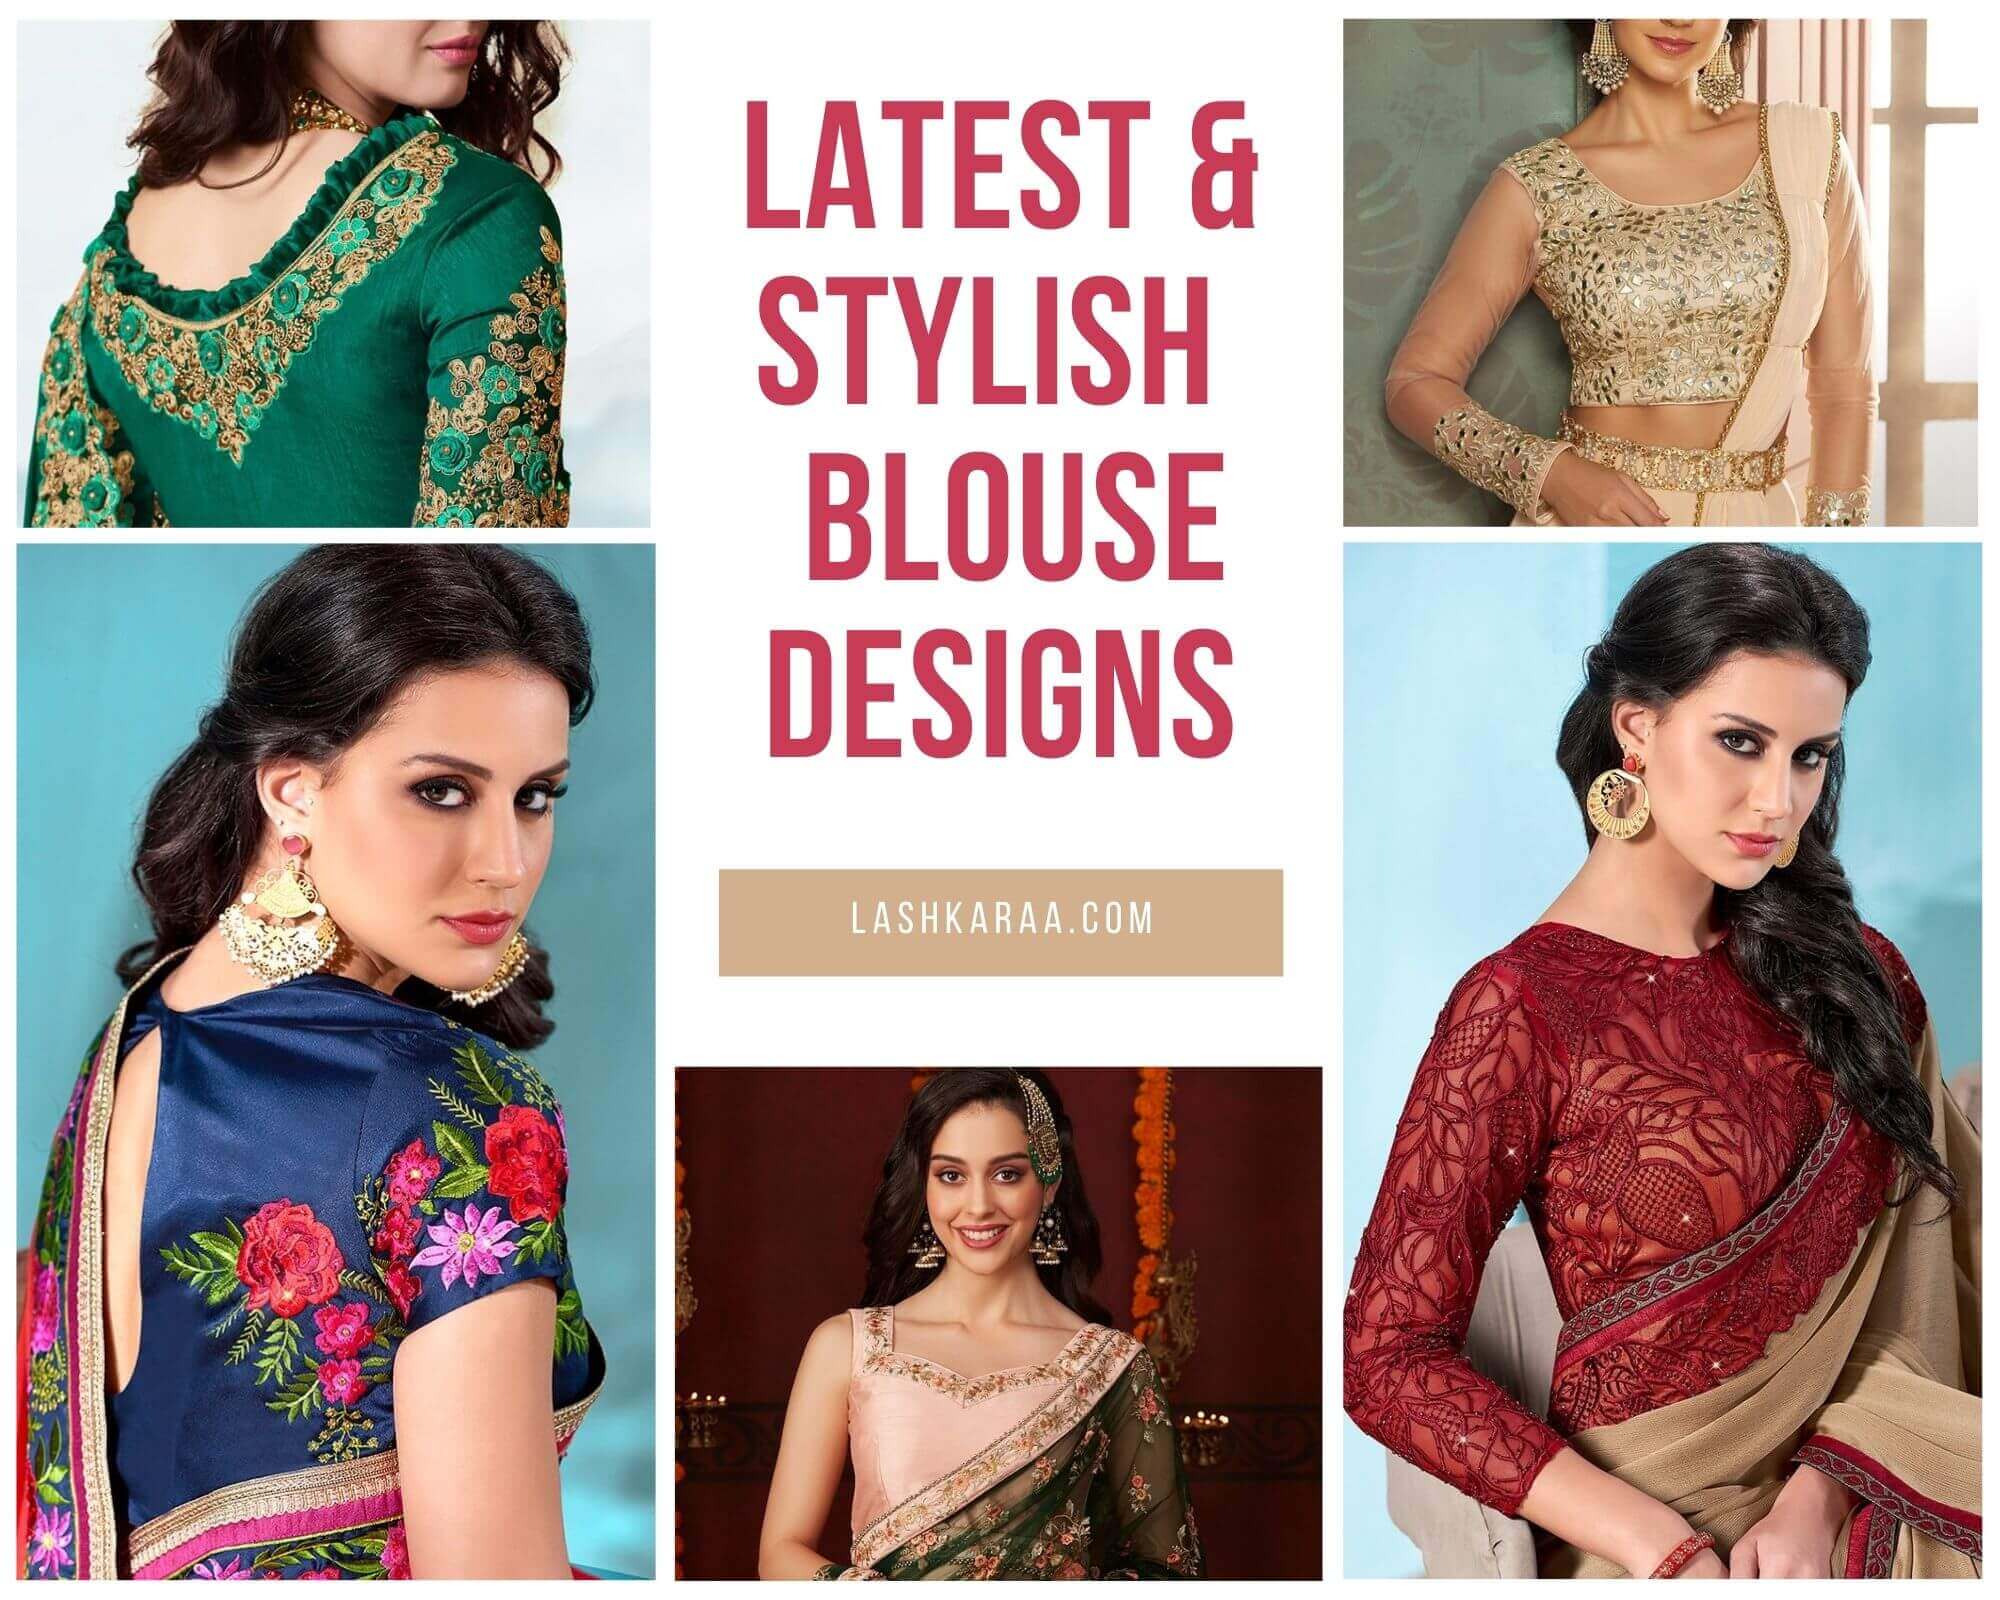 Saree Blouse Designs: Make A Statement With Your Look